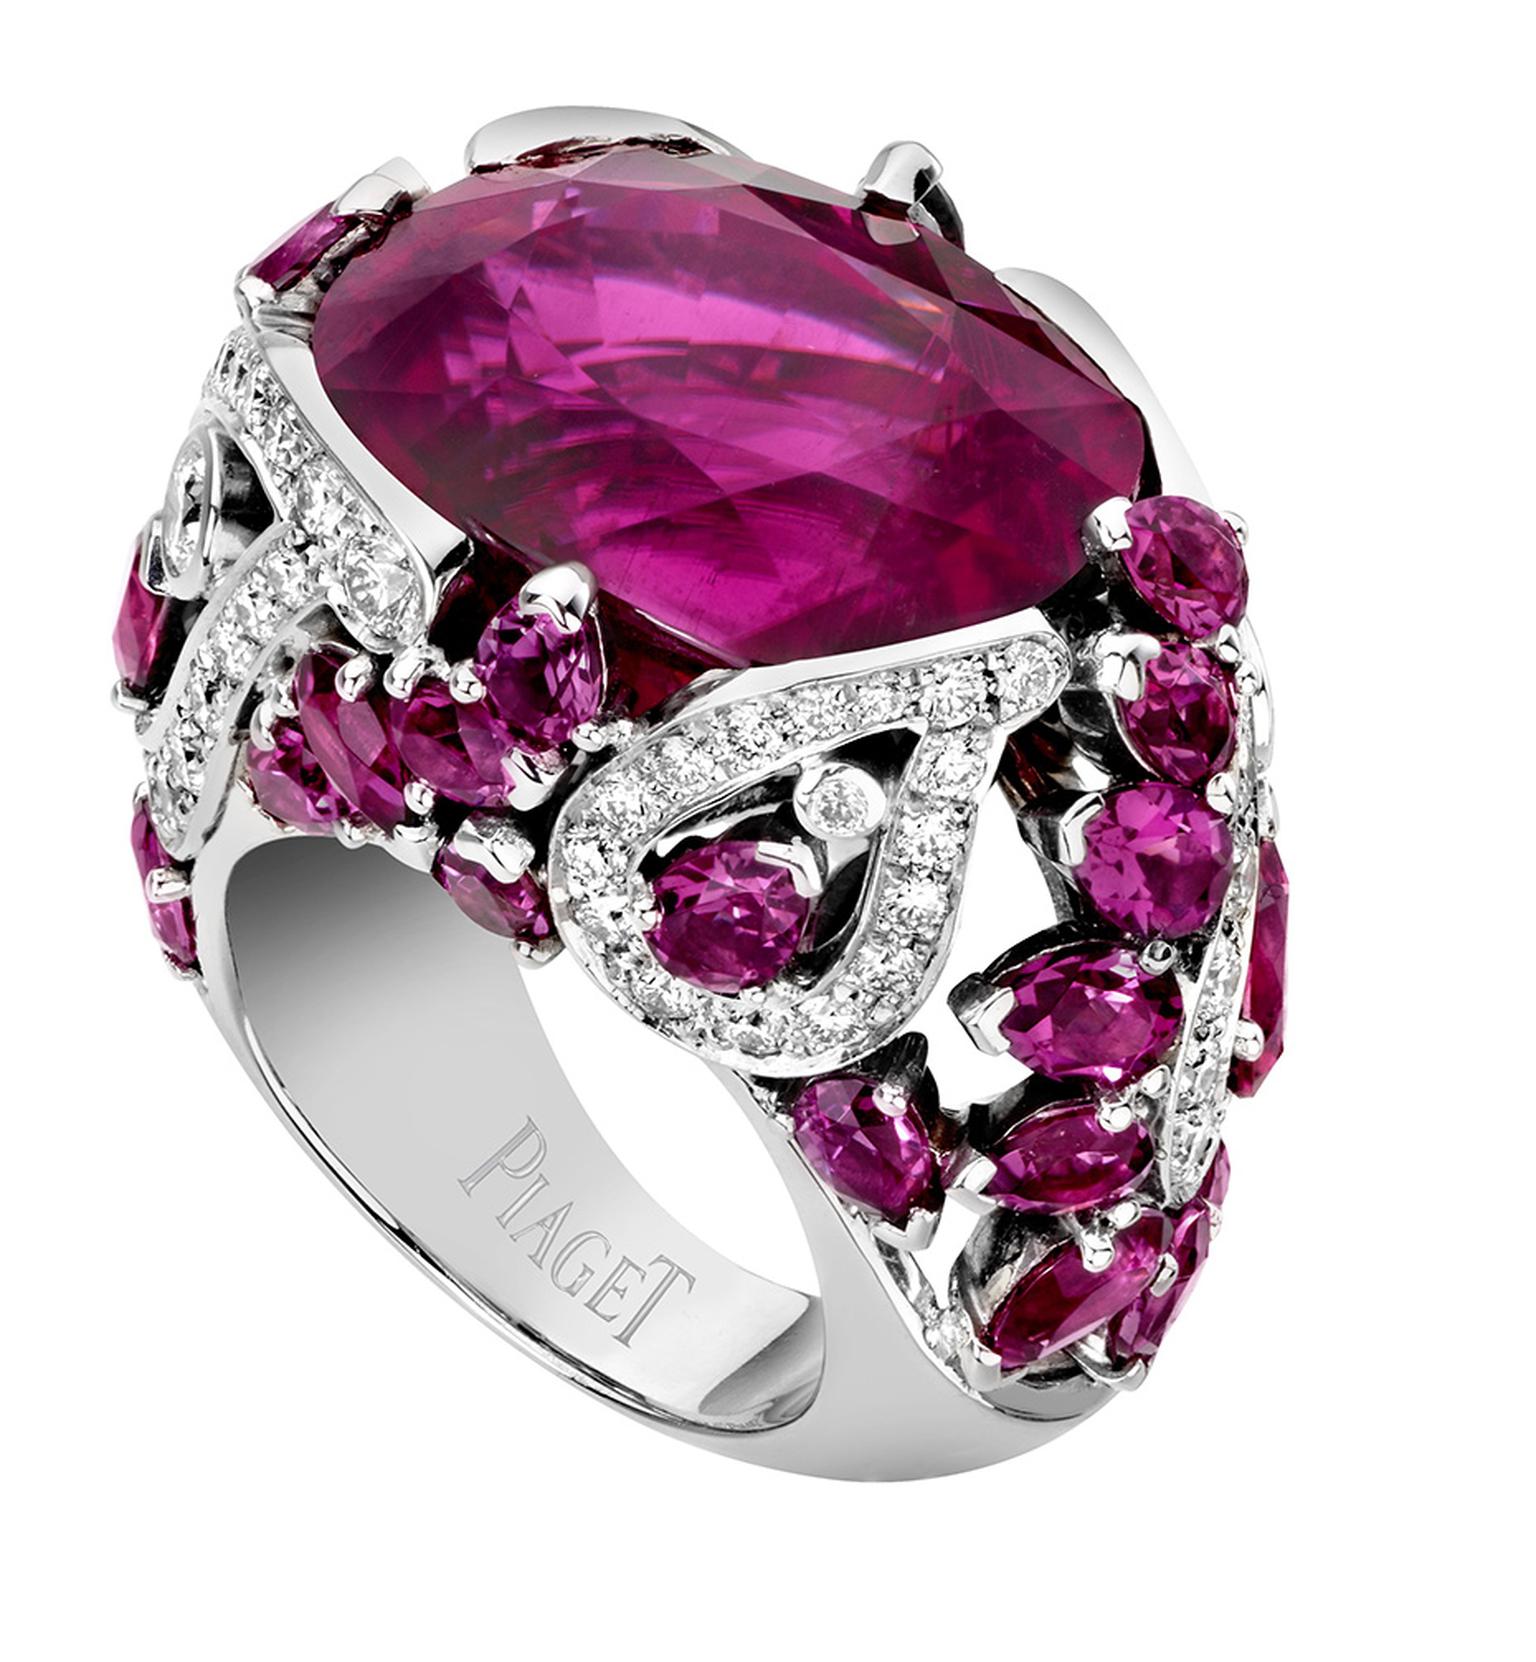 Piaget Limelight Couture Précieuse Ring in white gold with a central cushion-cut rubellite, pear-shaped rubellites and diamonds